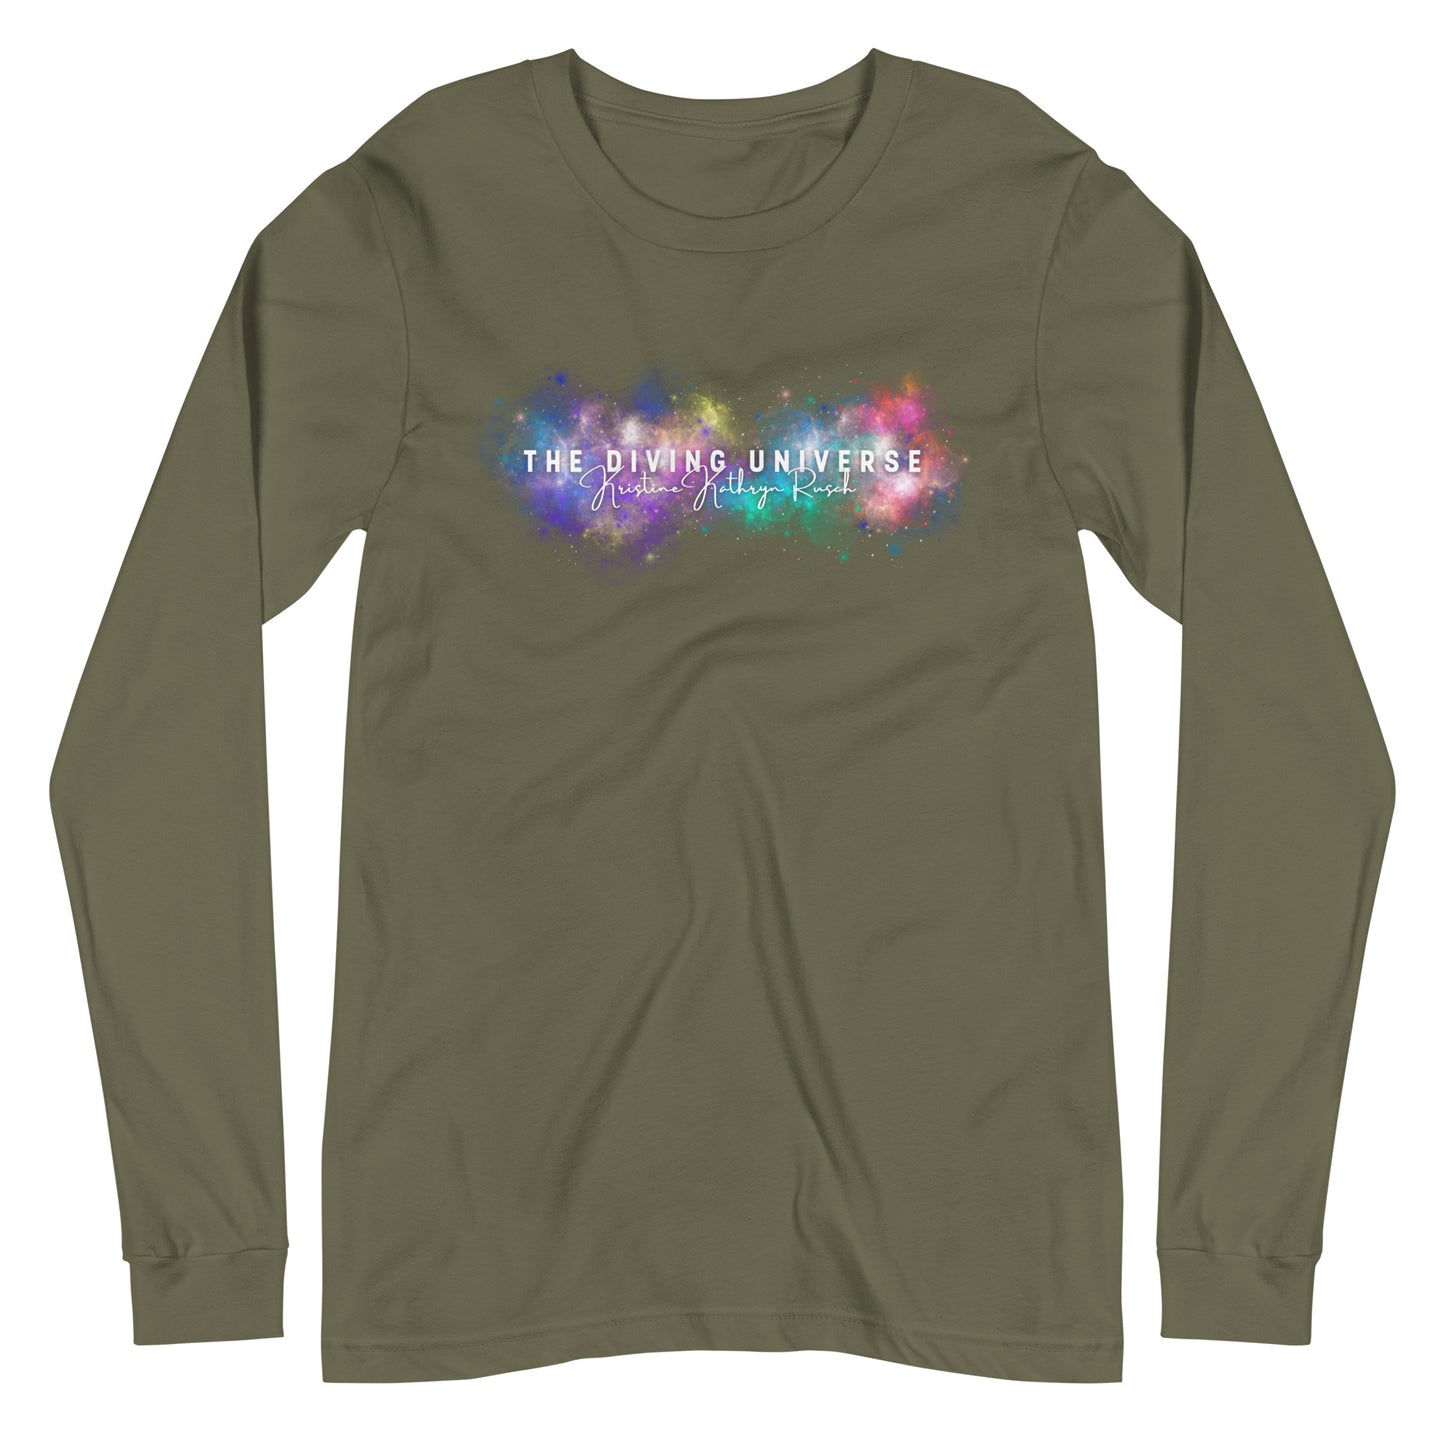 DIVING UNIVERSE NEBULA L/S Tee - The Diving Universe by Kristine Kathryn Rusch